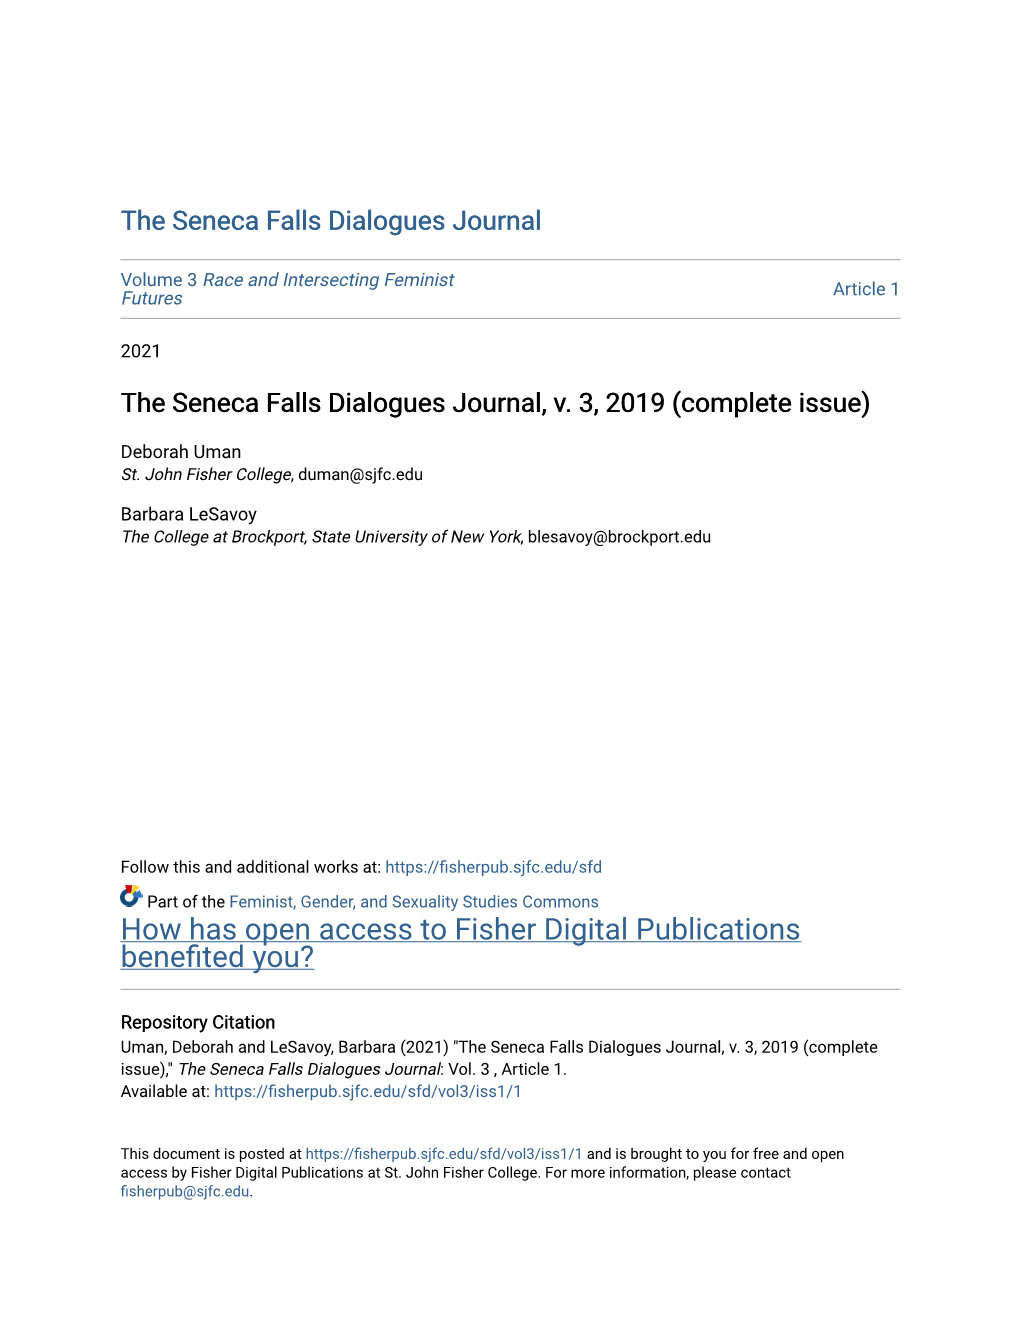 The Seneca Falls Dialogues Journal, V. 3, 2019 (Complete Issue)